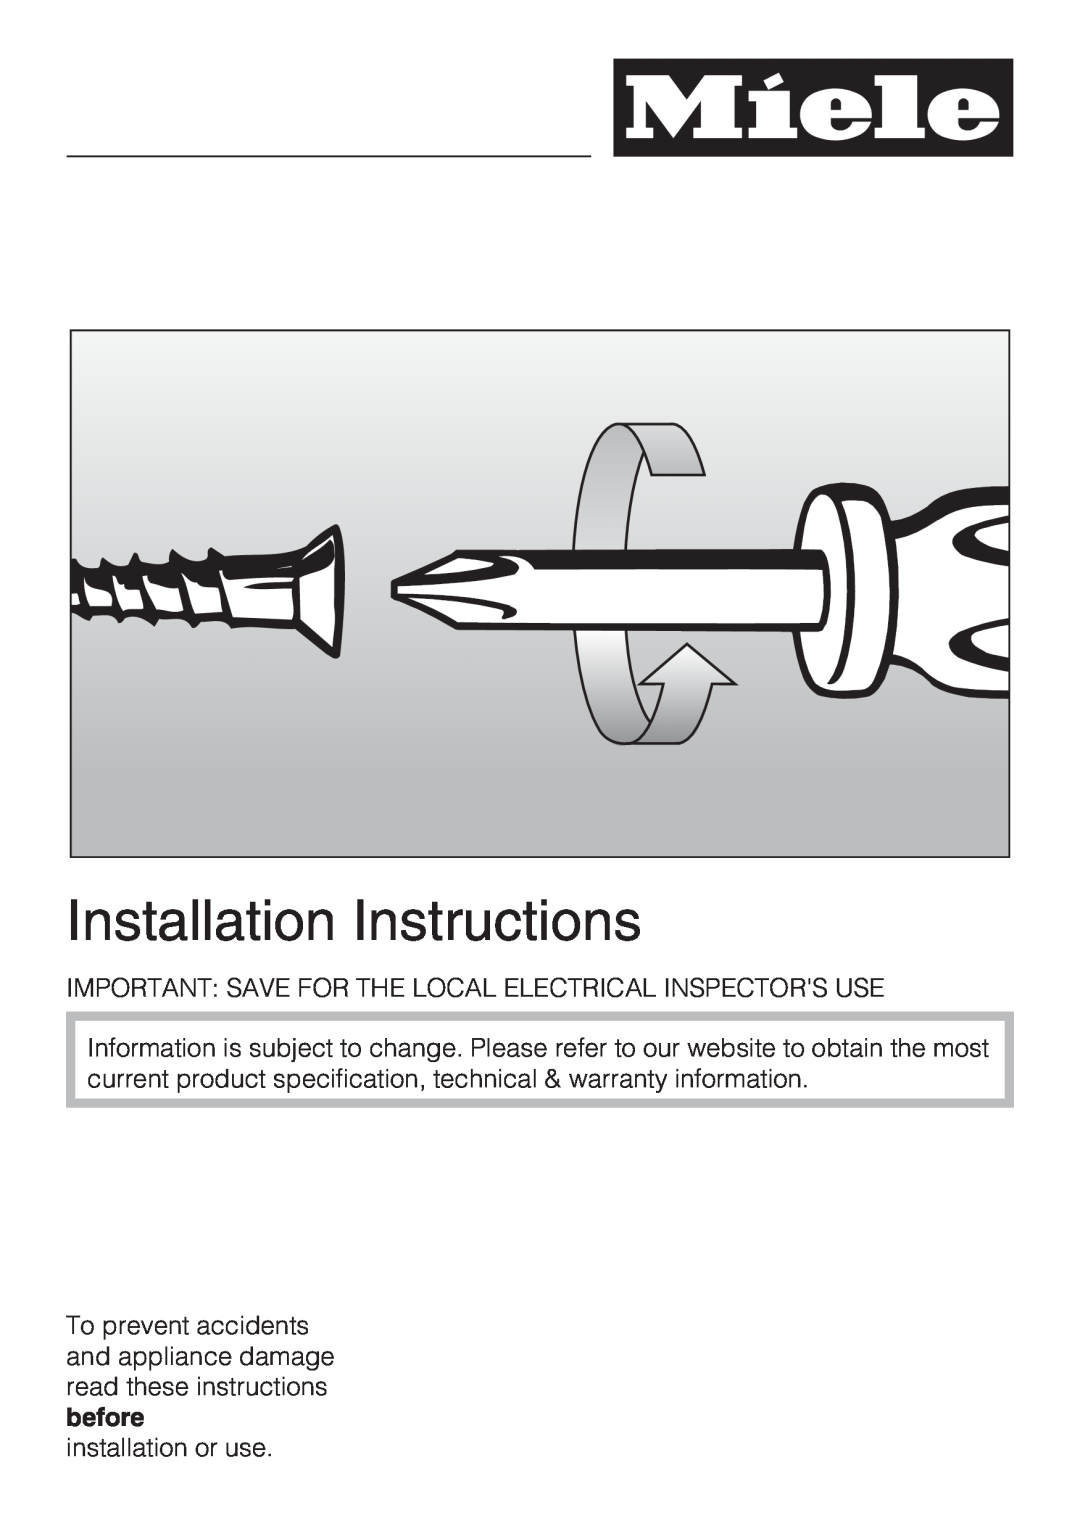 Miele CS 1112 Installation Instructions, Important Save For The Local Electrical Inspectors Use, installation or use 